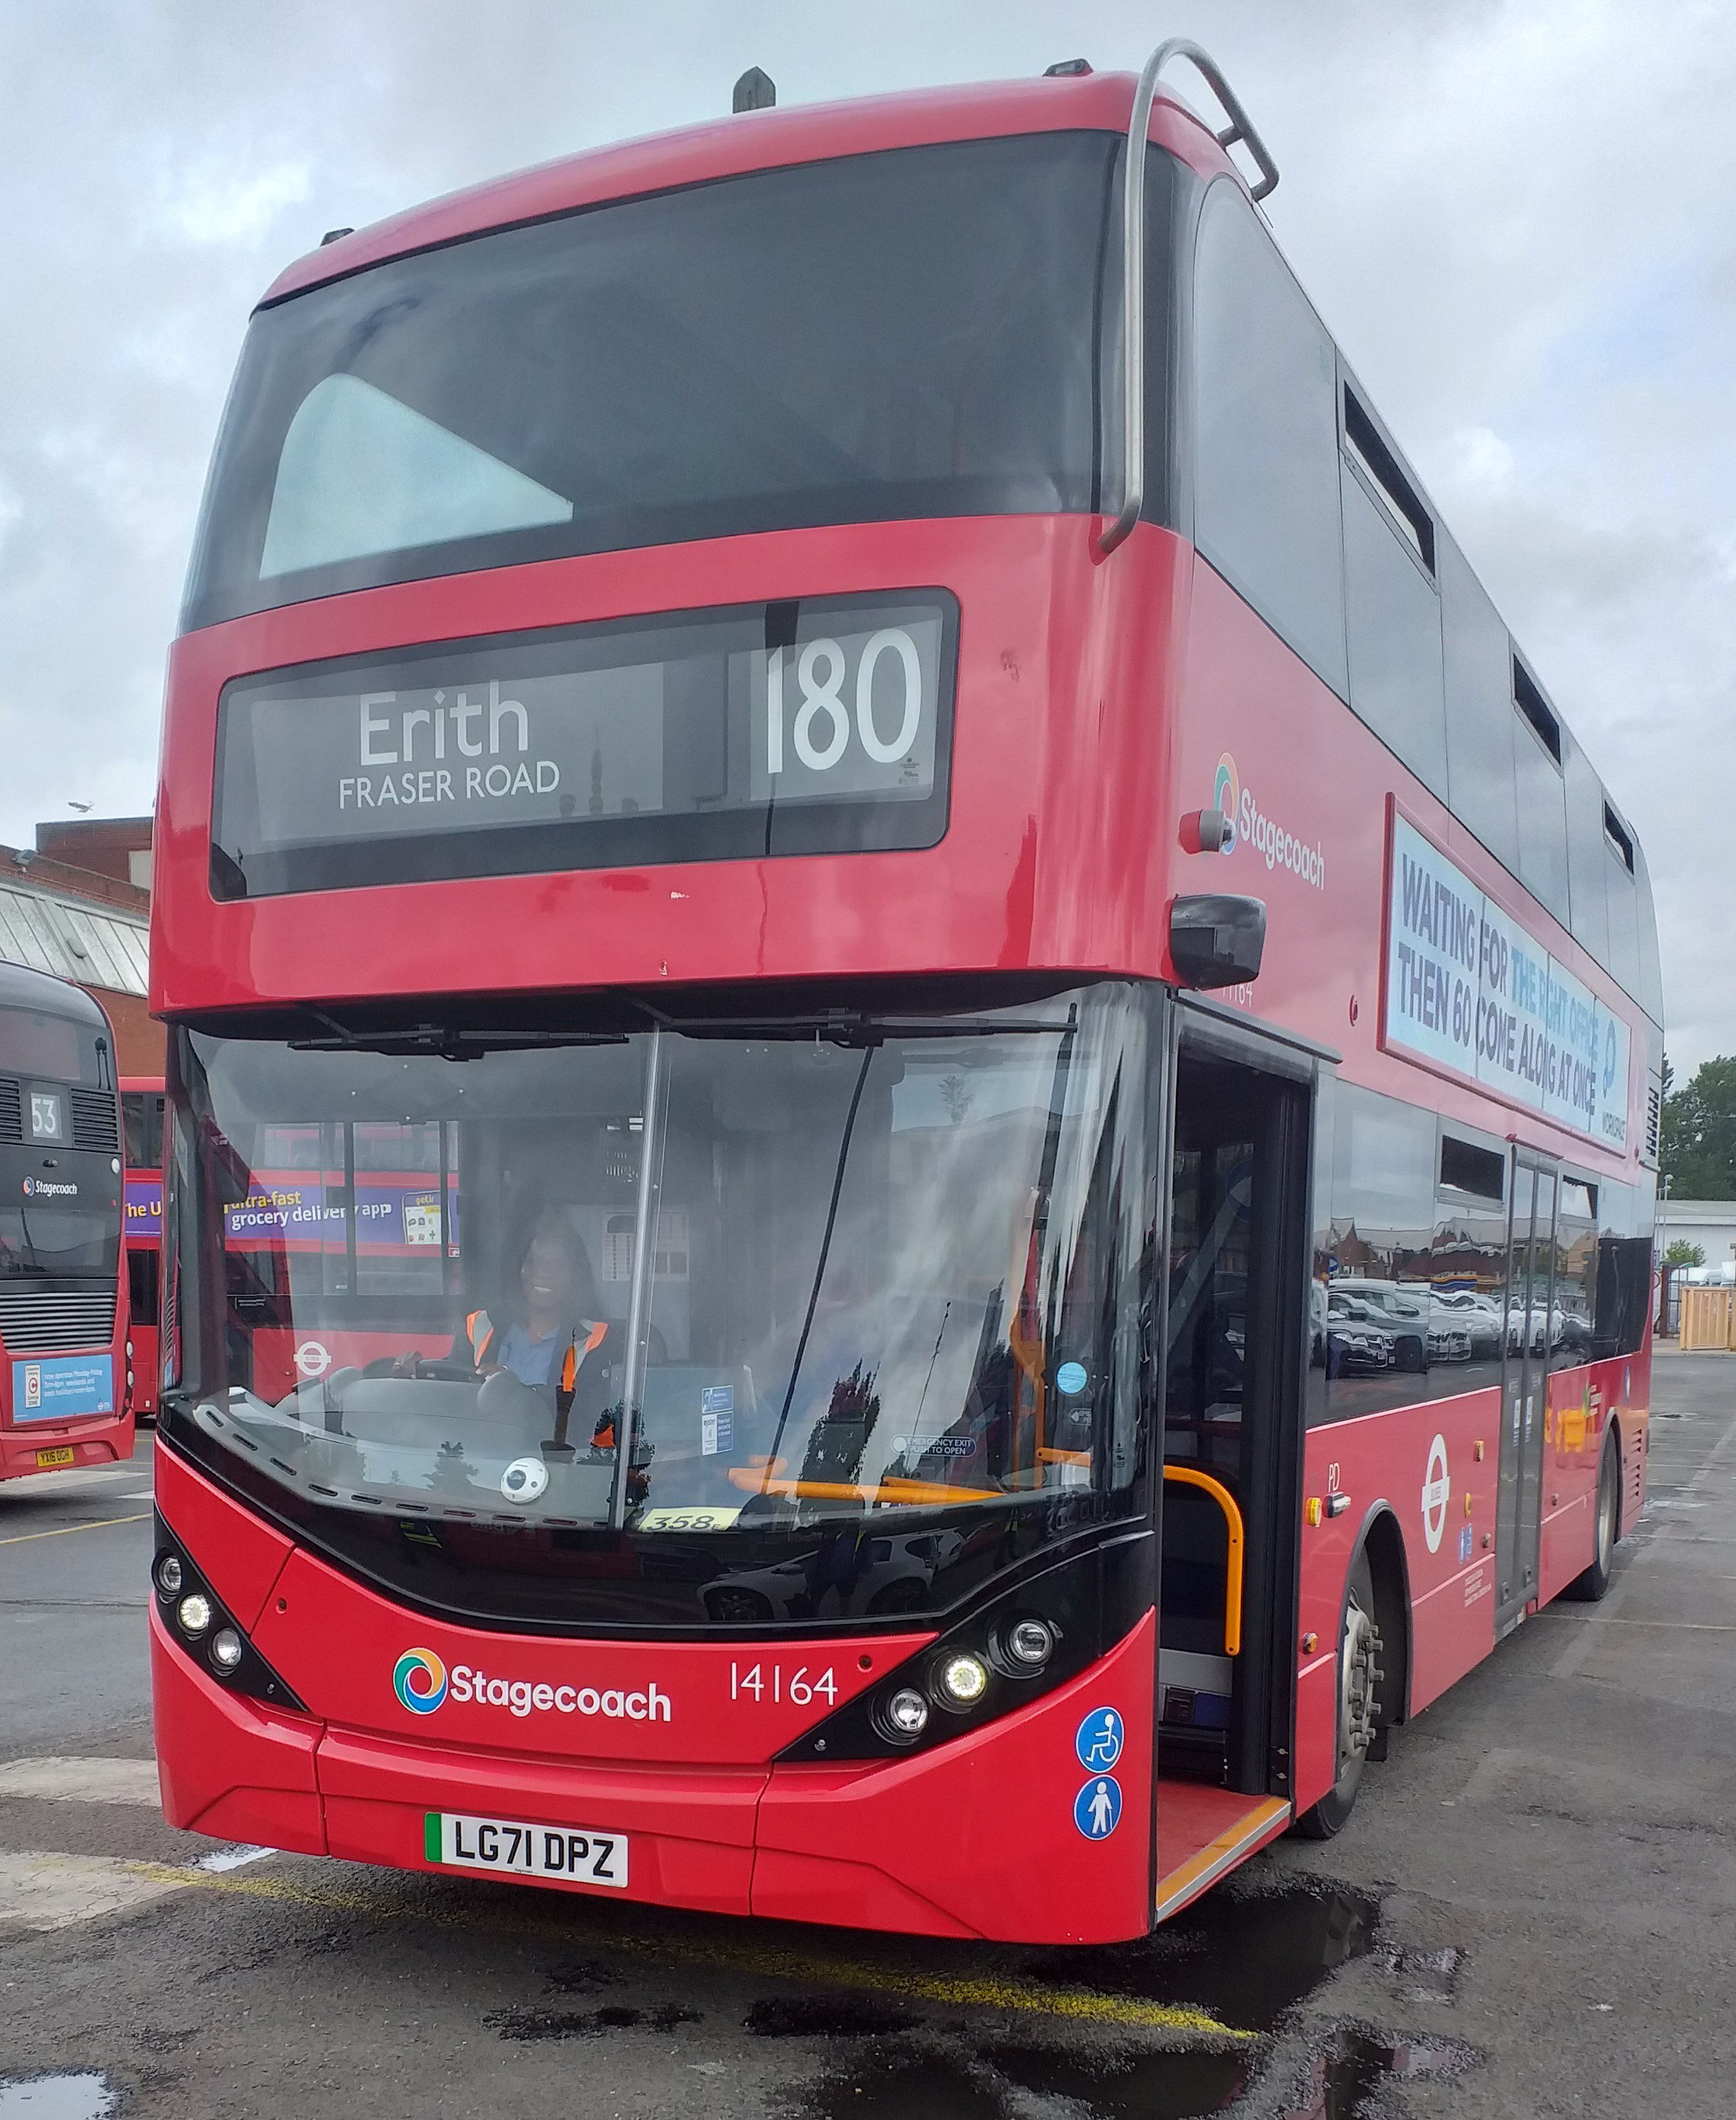 New 180 bus route expected to be jobs boon – South London News